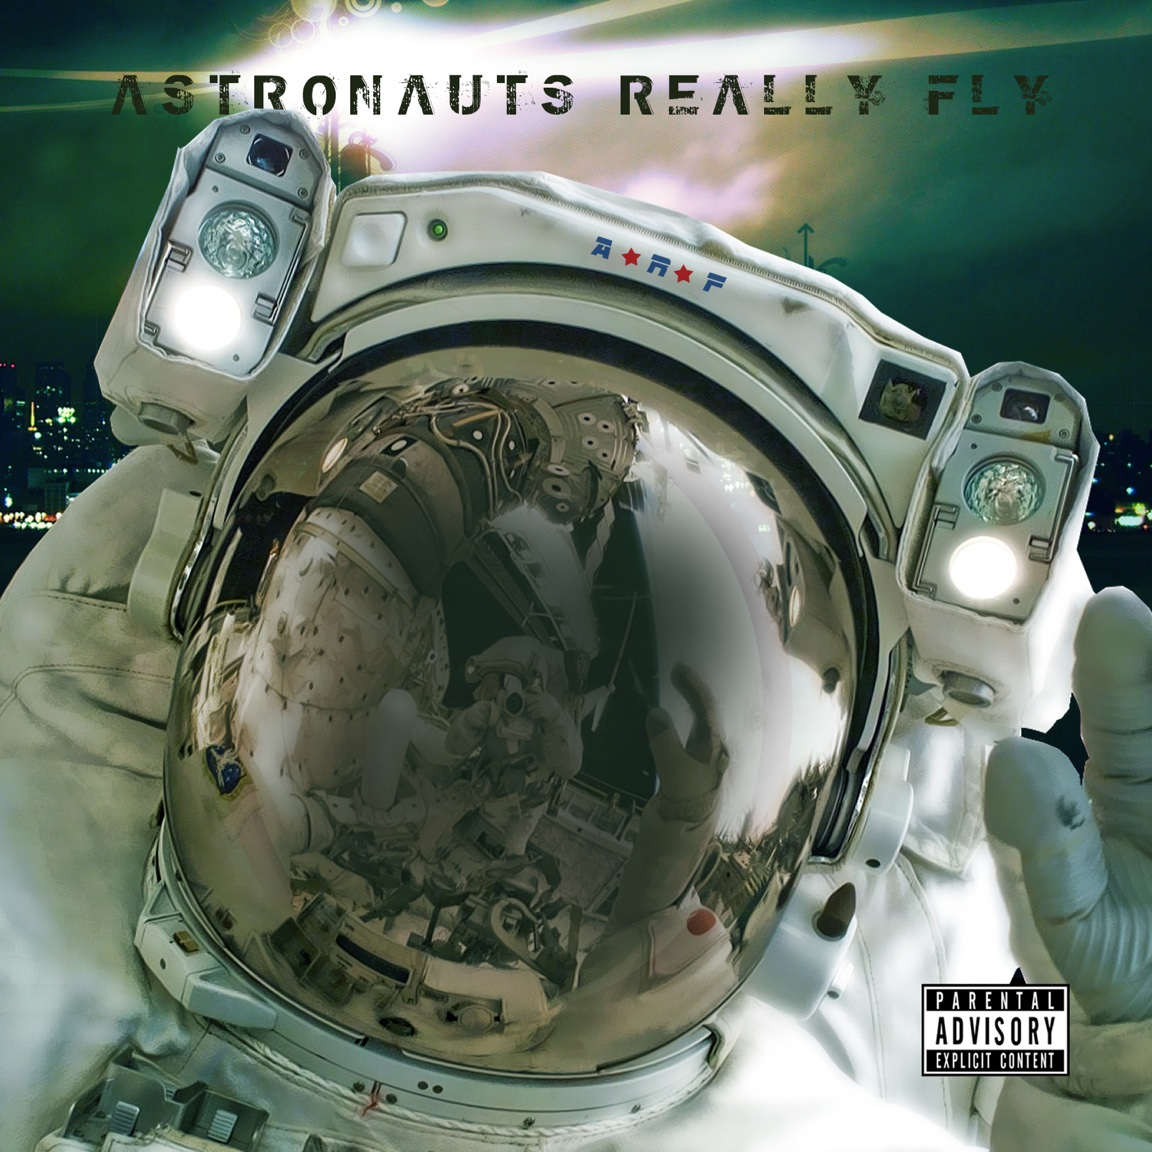 mont-brown-x-arf-astronauts-really-fly-ep-HHS1987-2013 Mont Brown x ARF - Astronauts Really Fly (EP)  